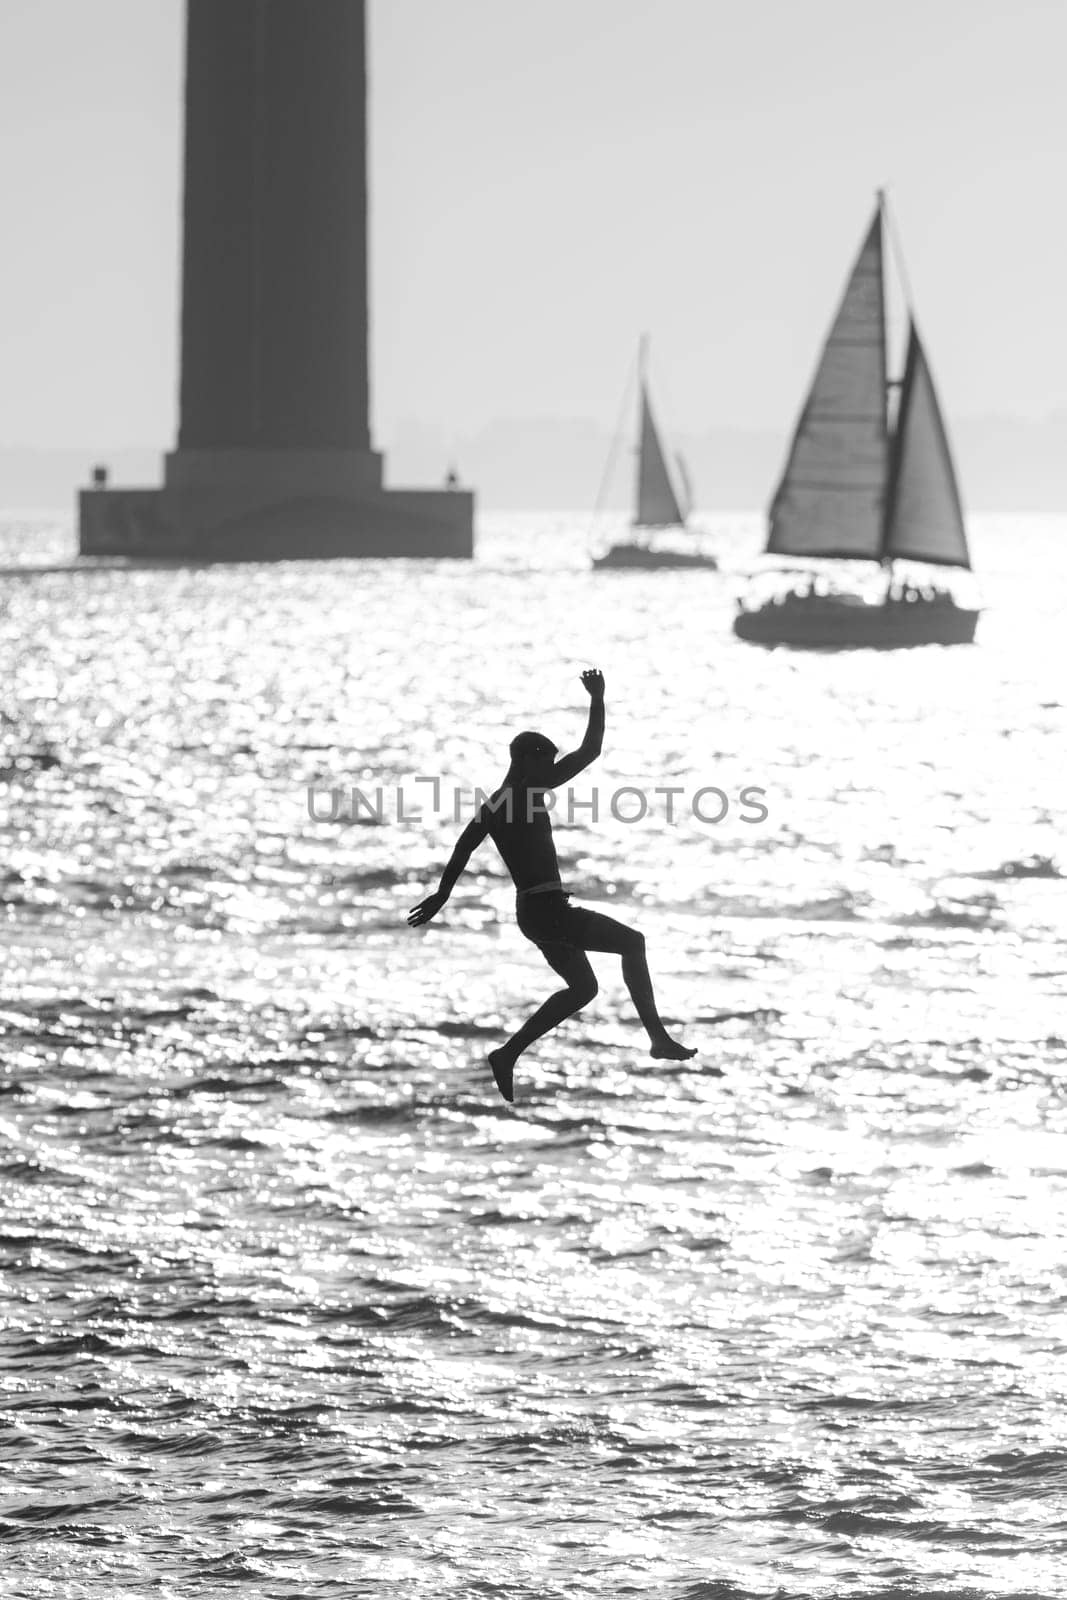 Teenage boy jumping in the water from a pier - black and white image by Studia72